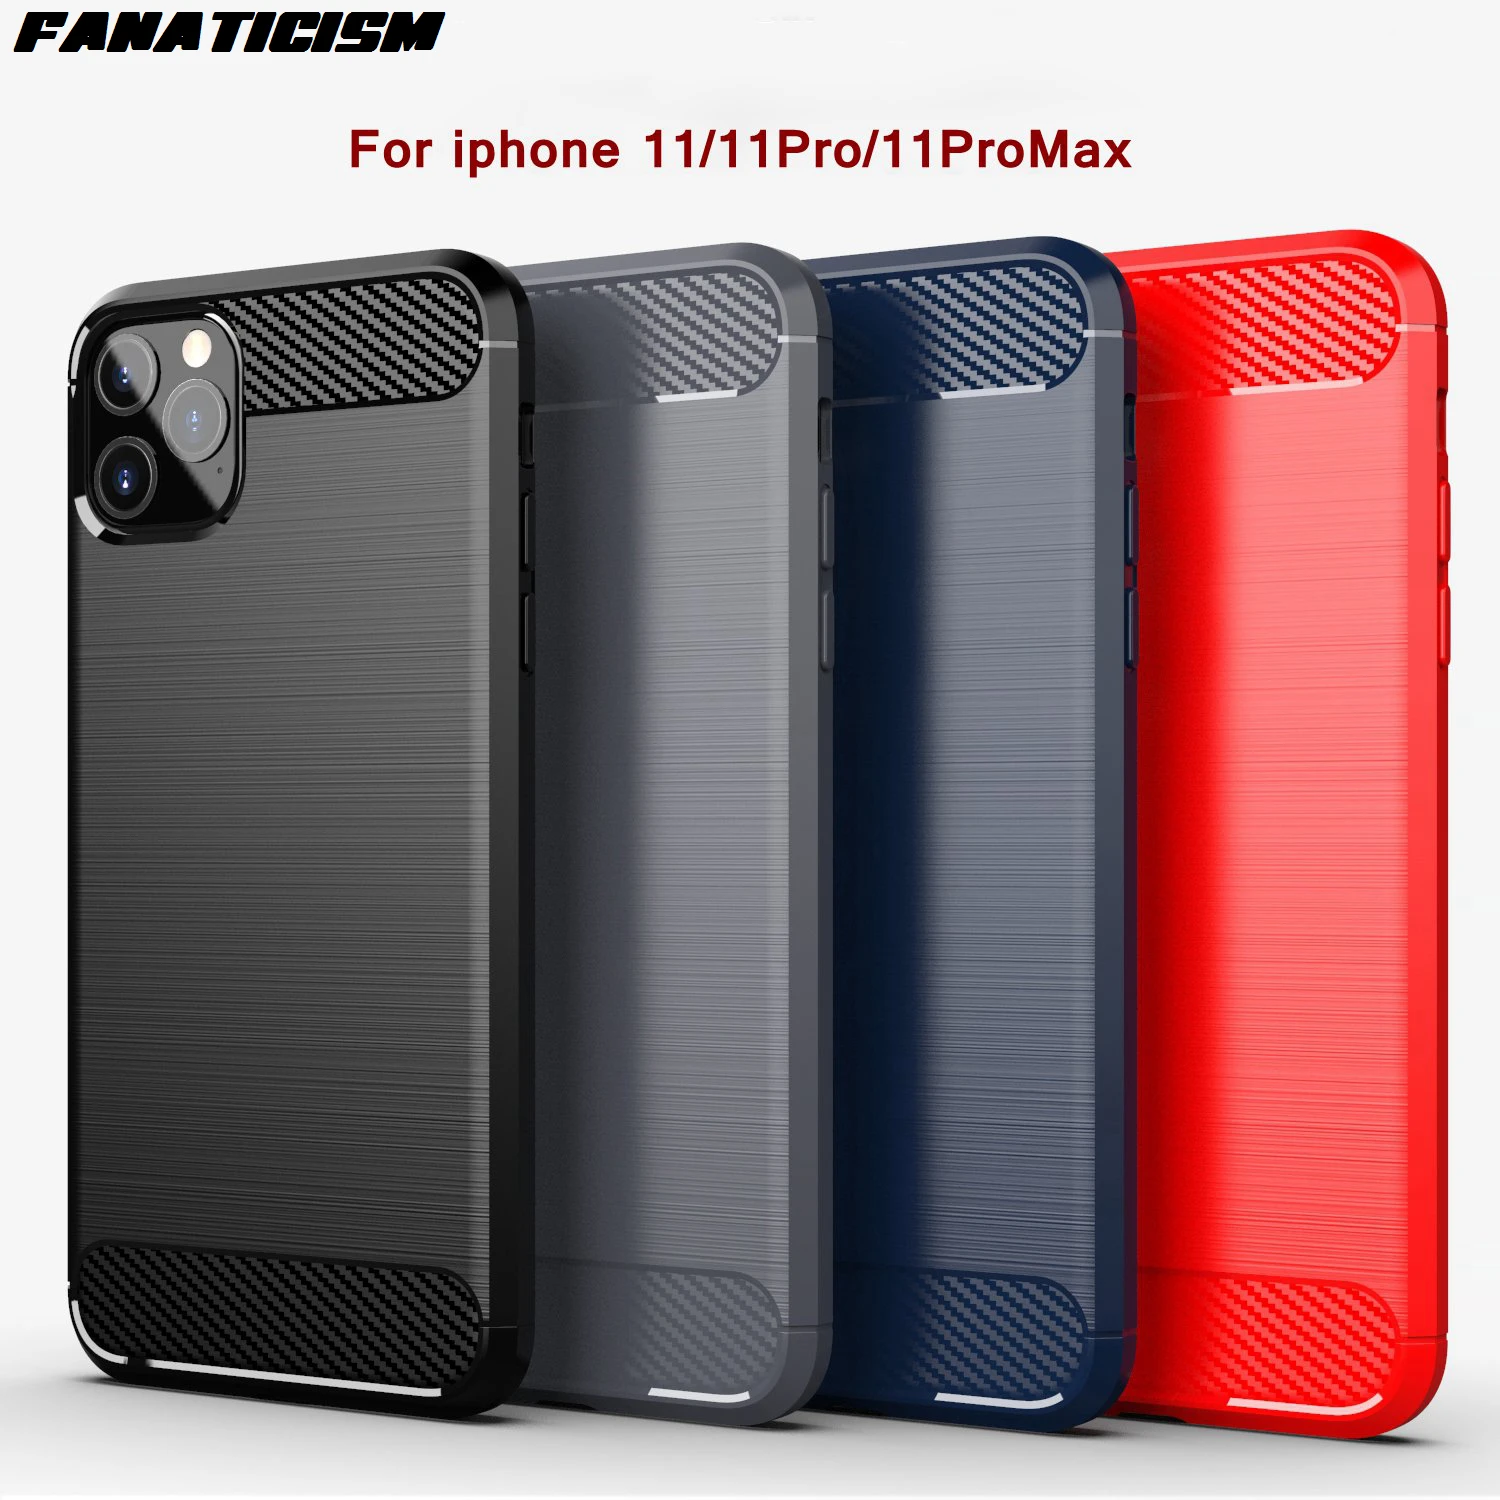 

Fashion Carbon Fiber Armor Brushed Rugged Soft TPU Cases For Iphone11 Iphone11Pro Iphone 11 Pro Max Rugged Shield Phone Cover